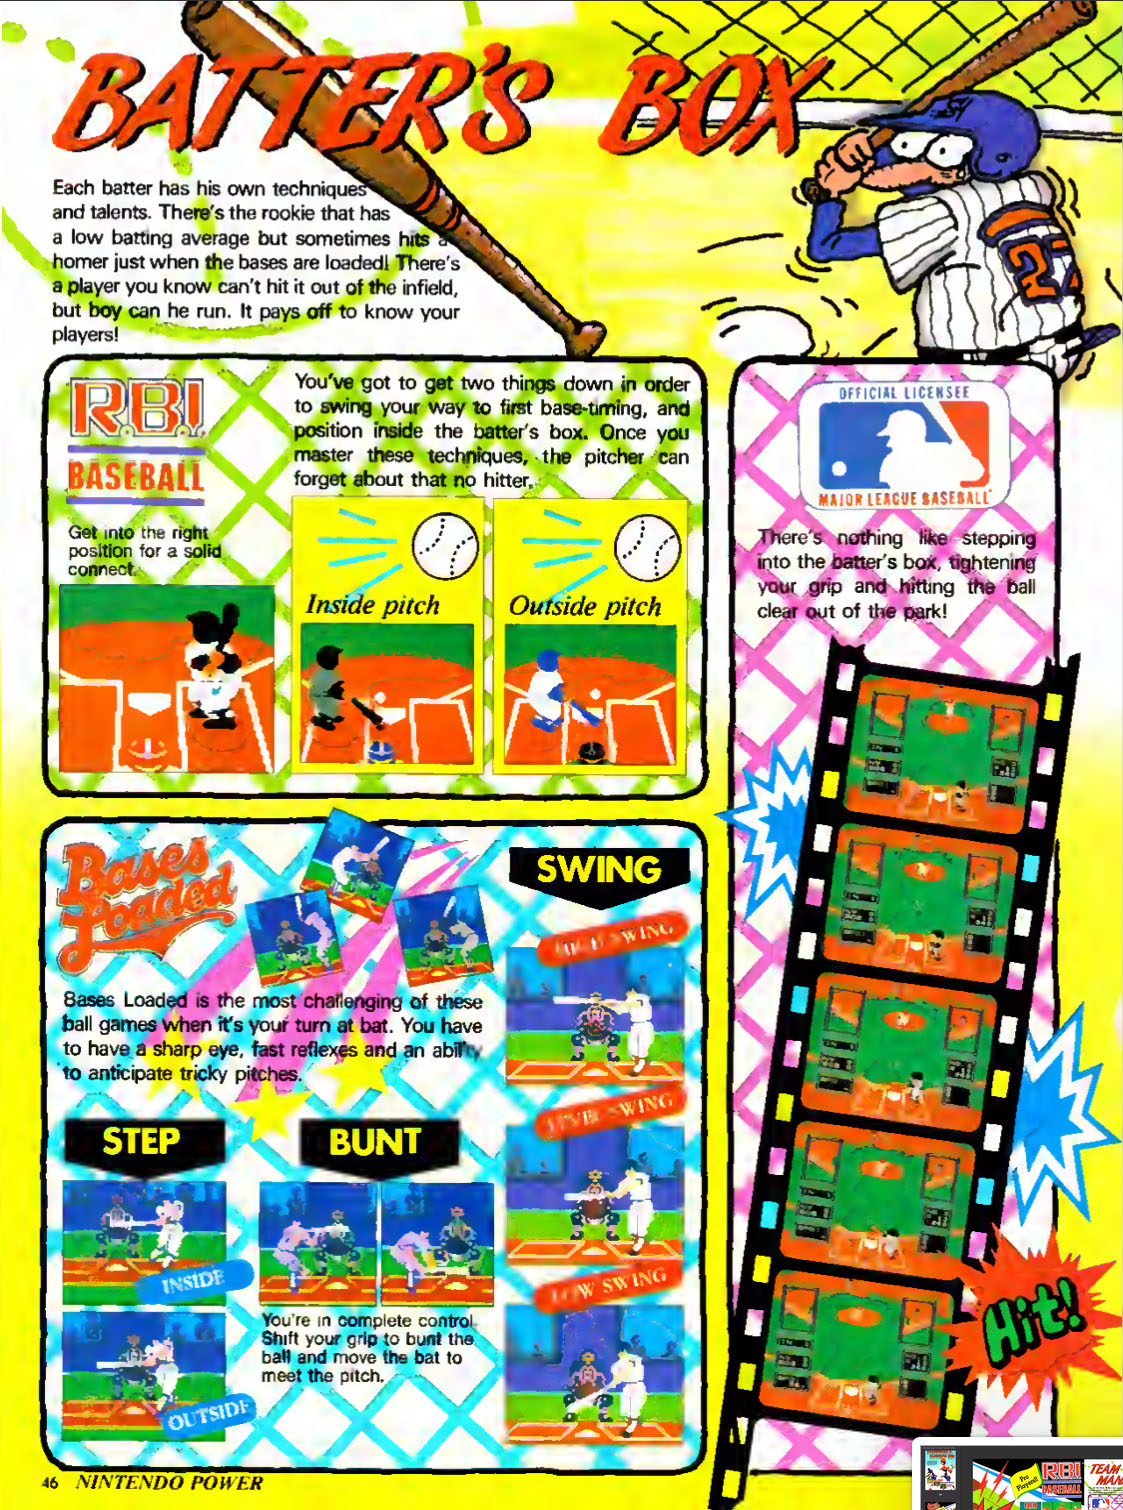 Baseball Round Up, Nintendo Power July-August 1988 page 46